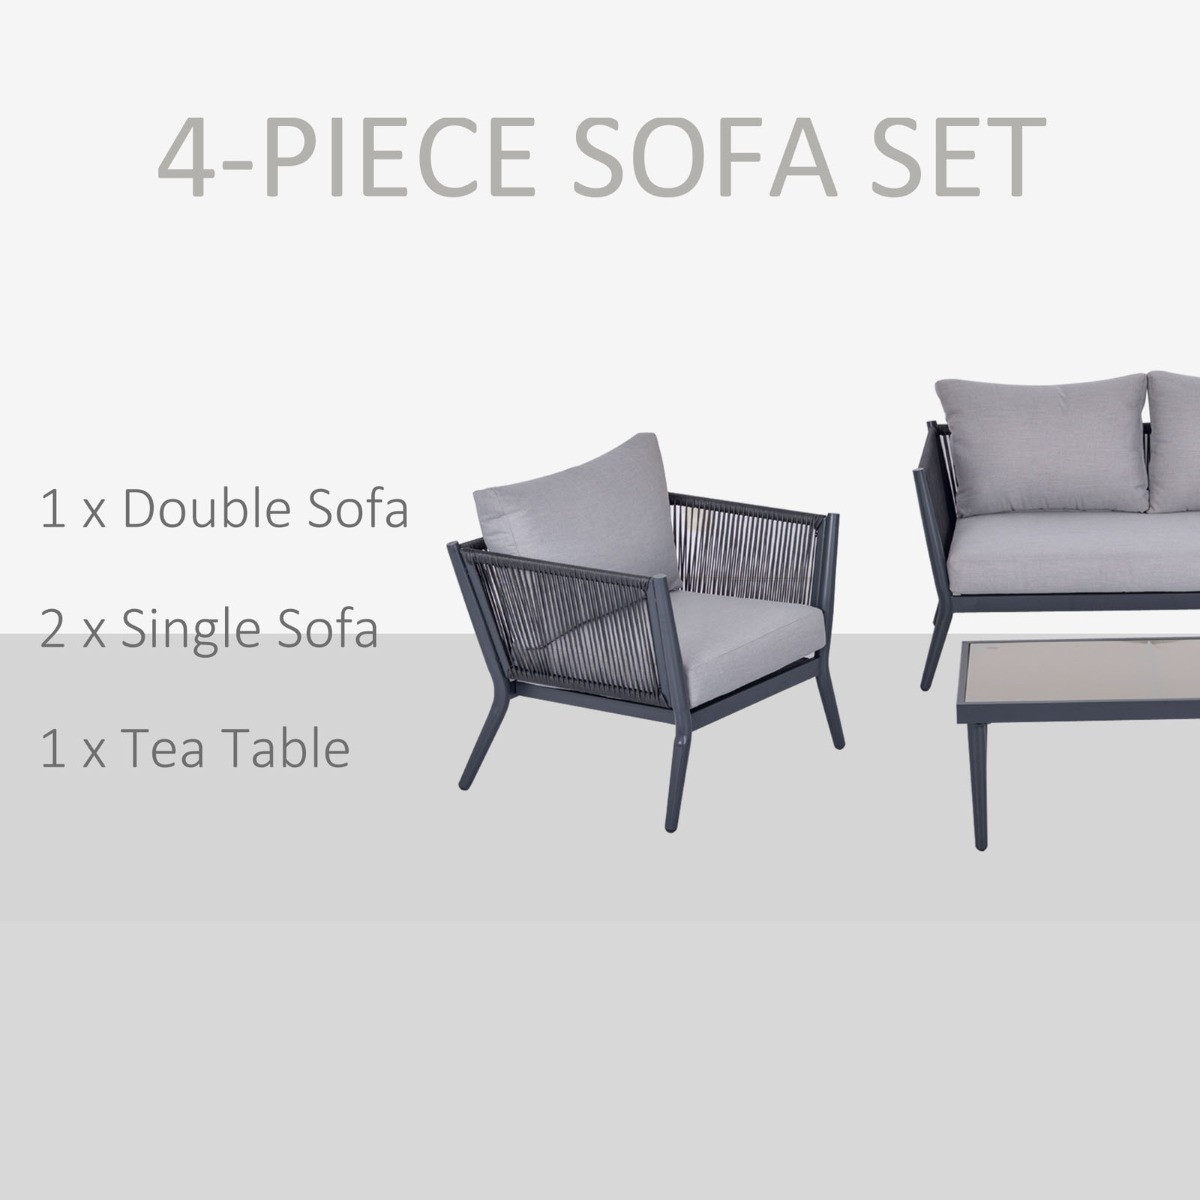 Outsunny Wicker Rattan Sofa Set With Coffee Table, Charcoal - 4 Seater>